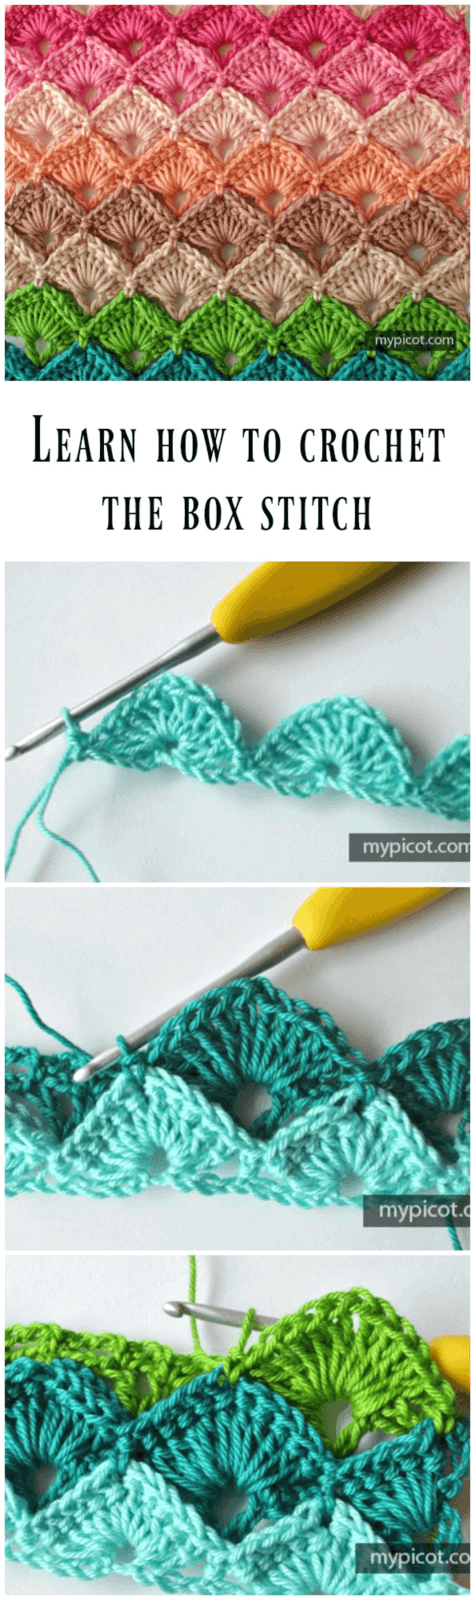 Learn Crochet Box Stitch Step by step guide